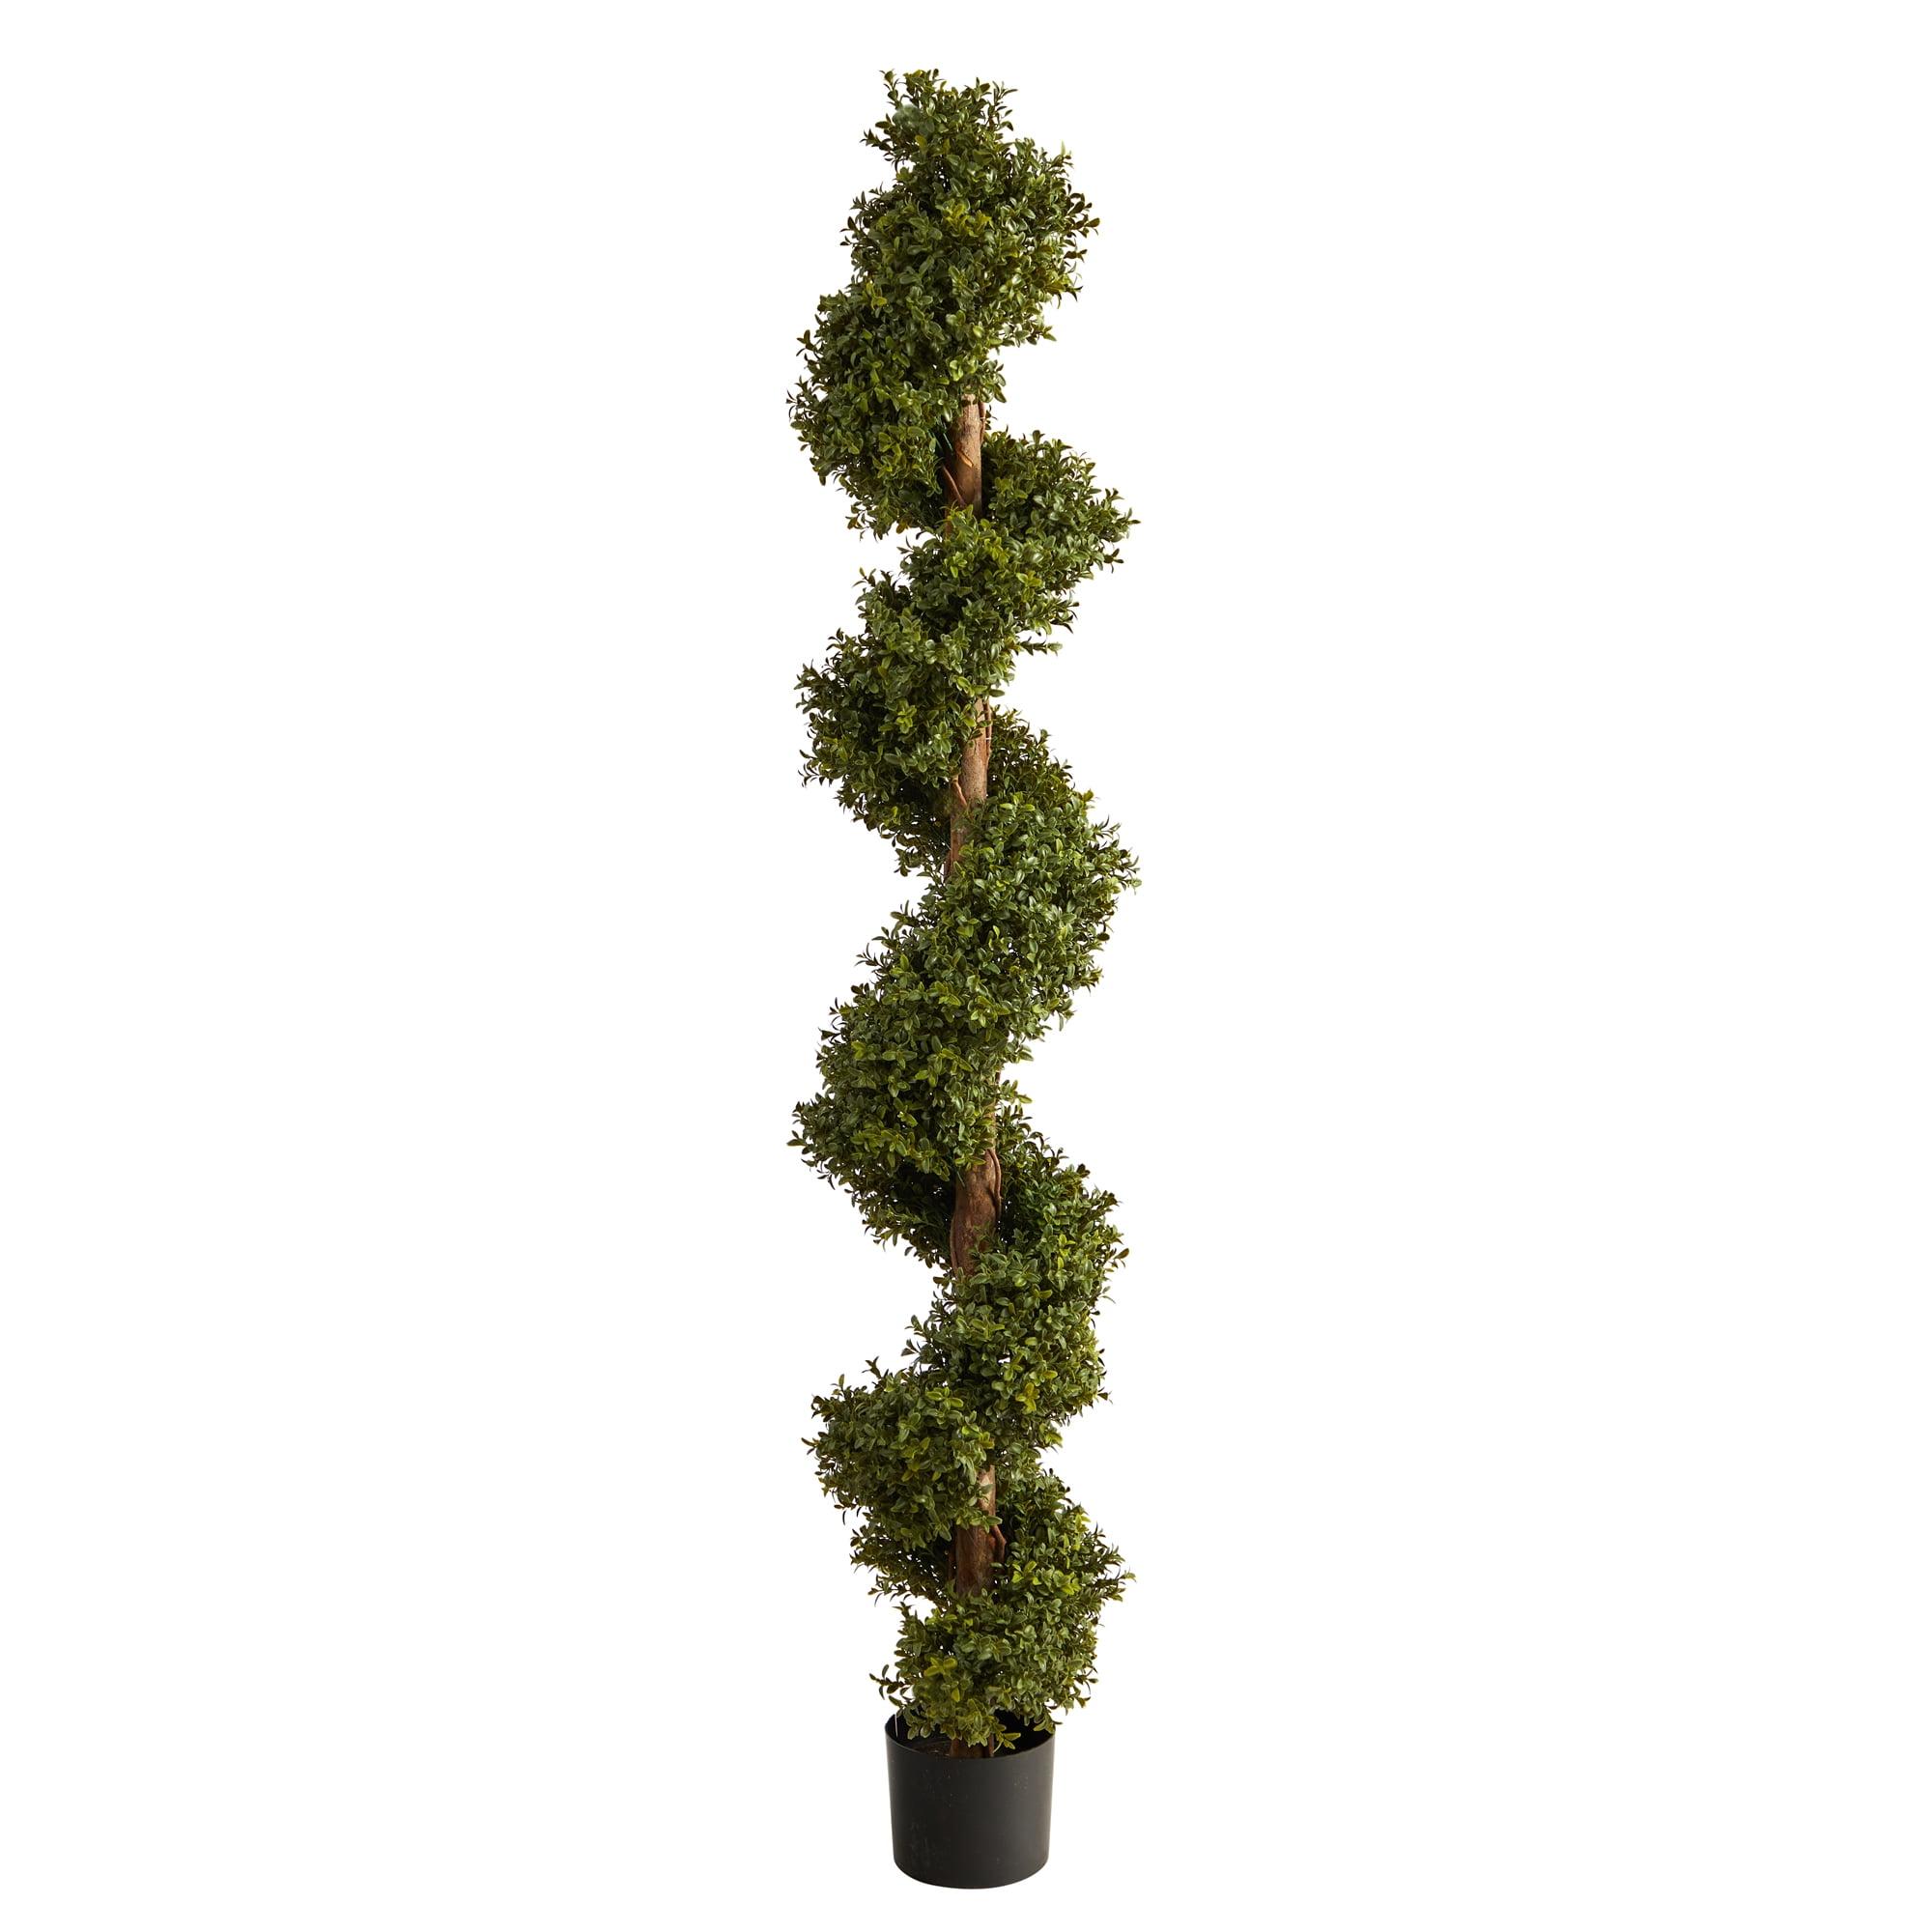 Jumbo Aquarium Or Pond Artificial Plant Stands Over 3 Feet Tall With Heavy Base Bushy Foliage